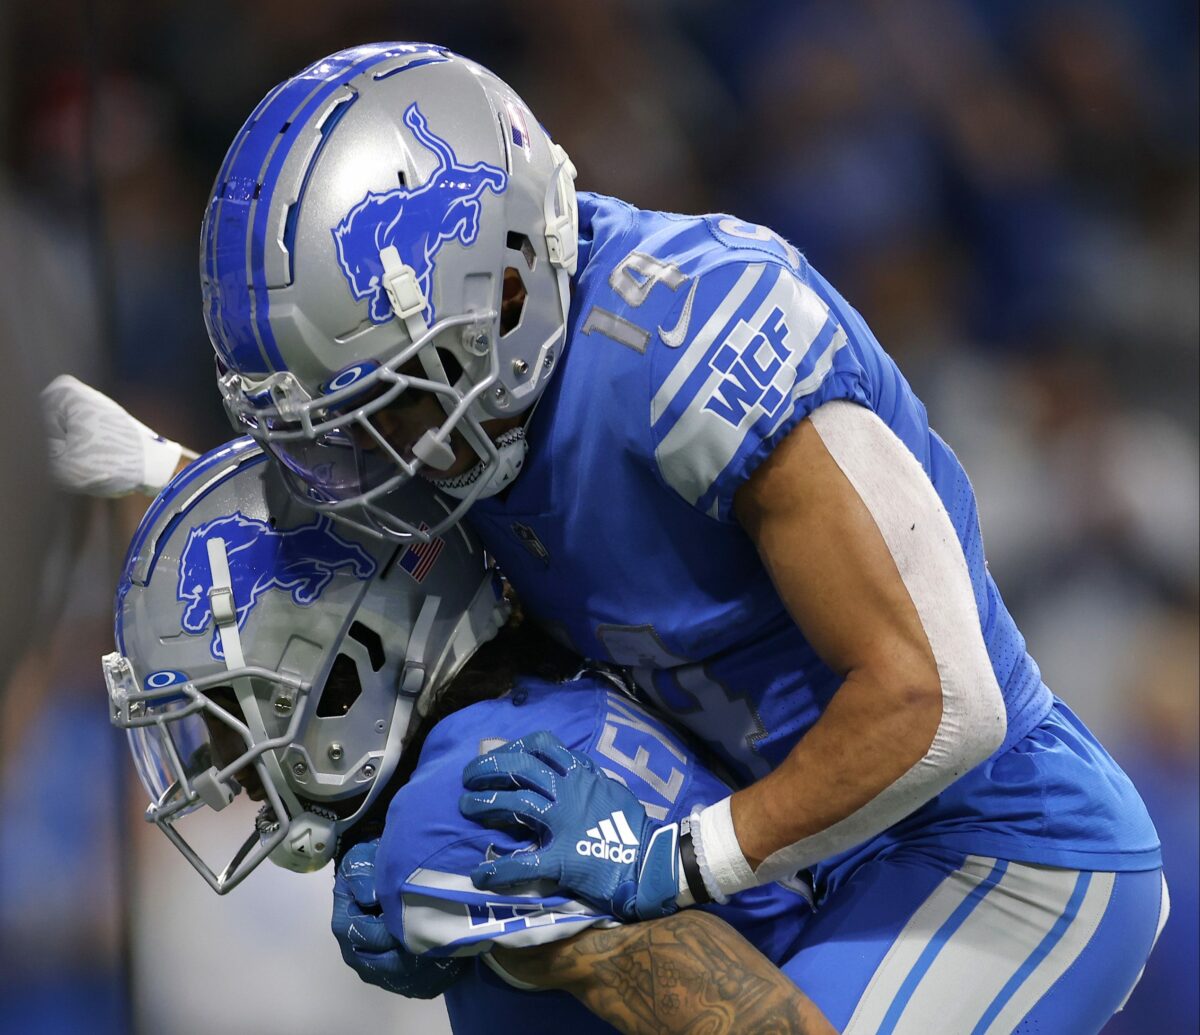 Lions edge into positive point differential for the season in win over Vikings